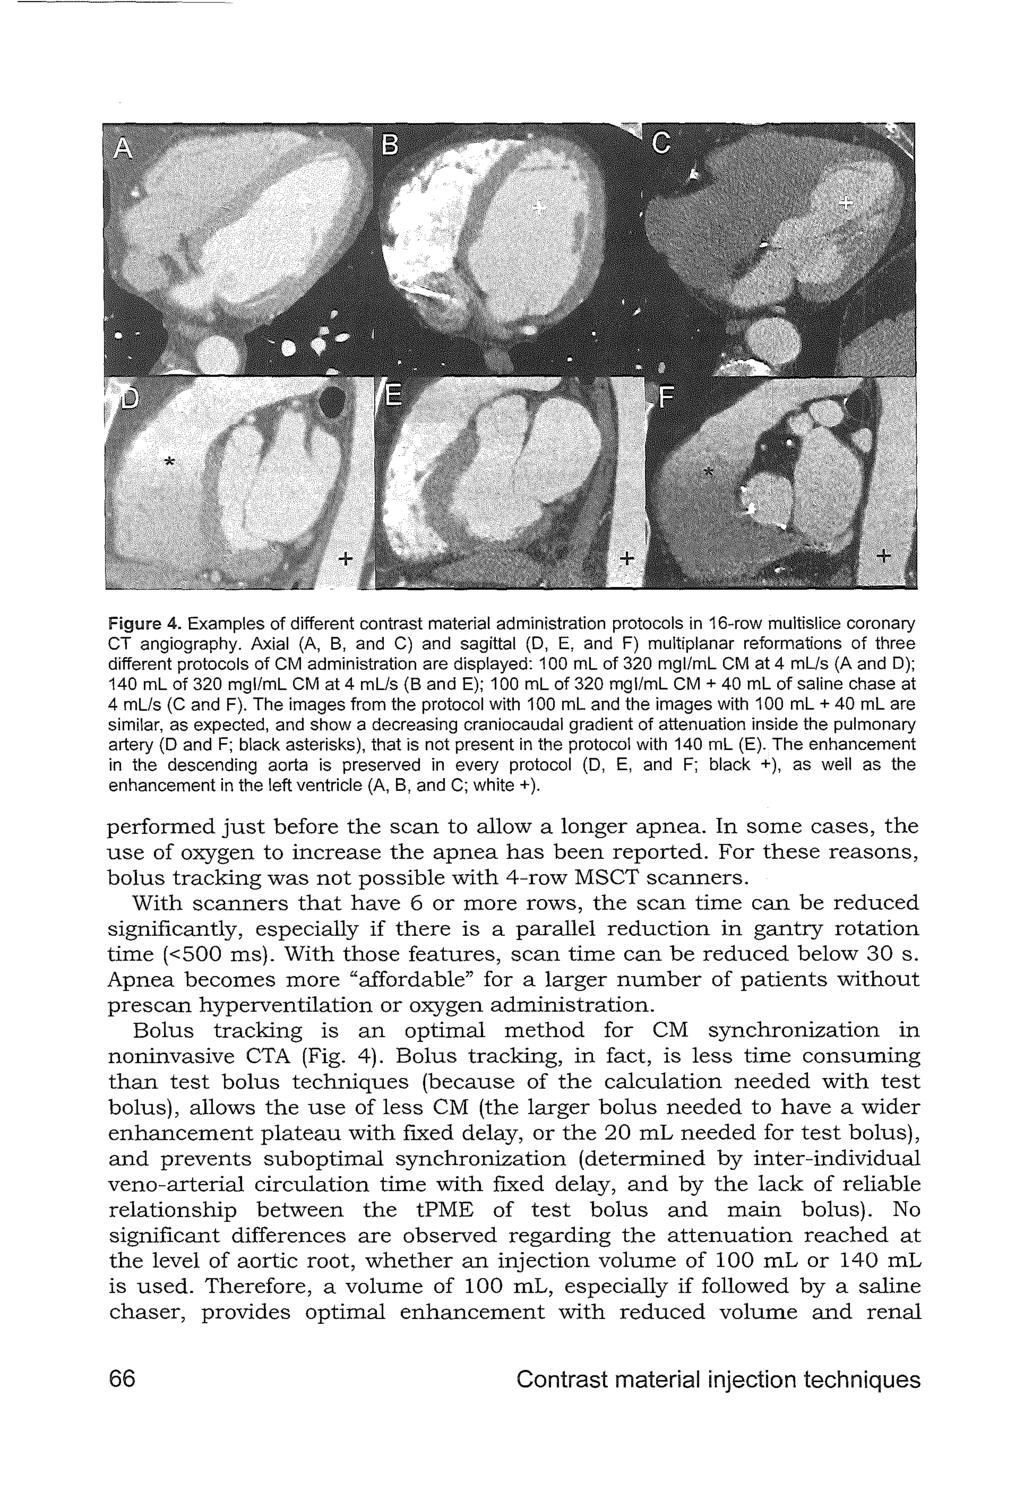 Figure 4. Examples of different contrast material administration protocols in 16-row multislice coronary CT angiography.